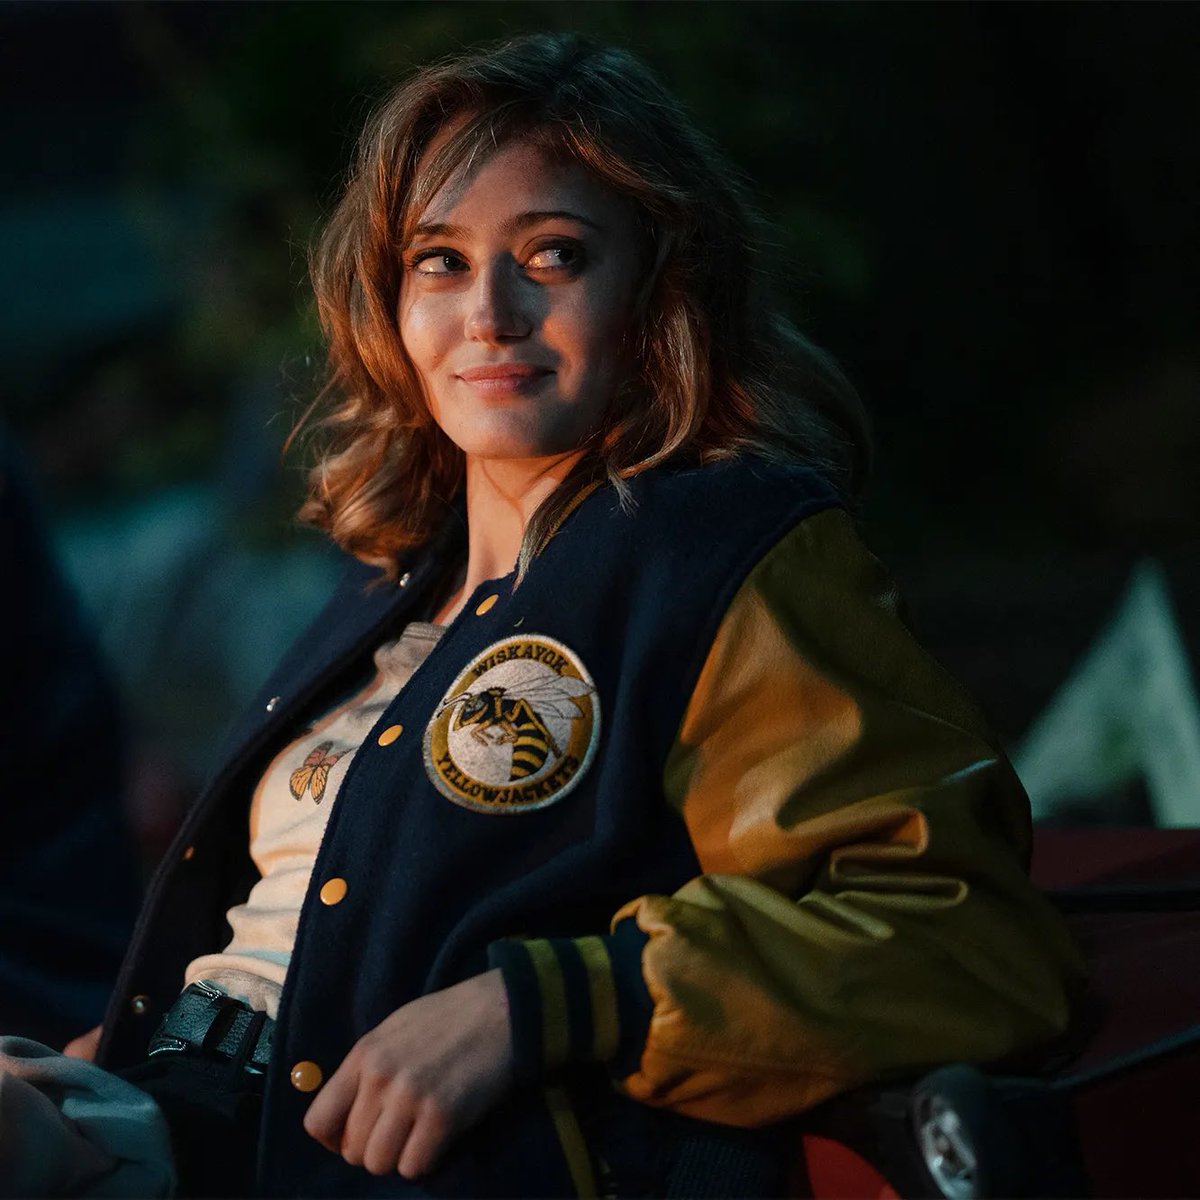 Ella Purnell, queen of TV, makes me pass out love her sm